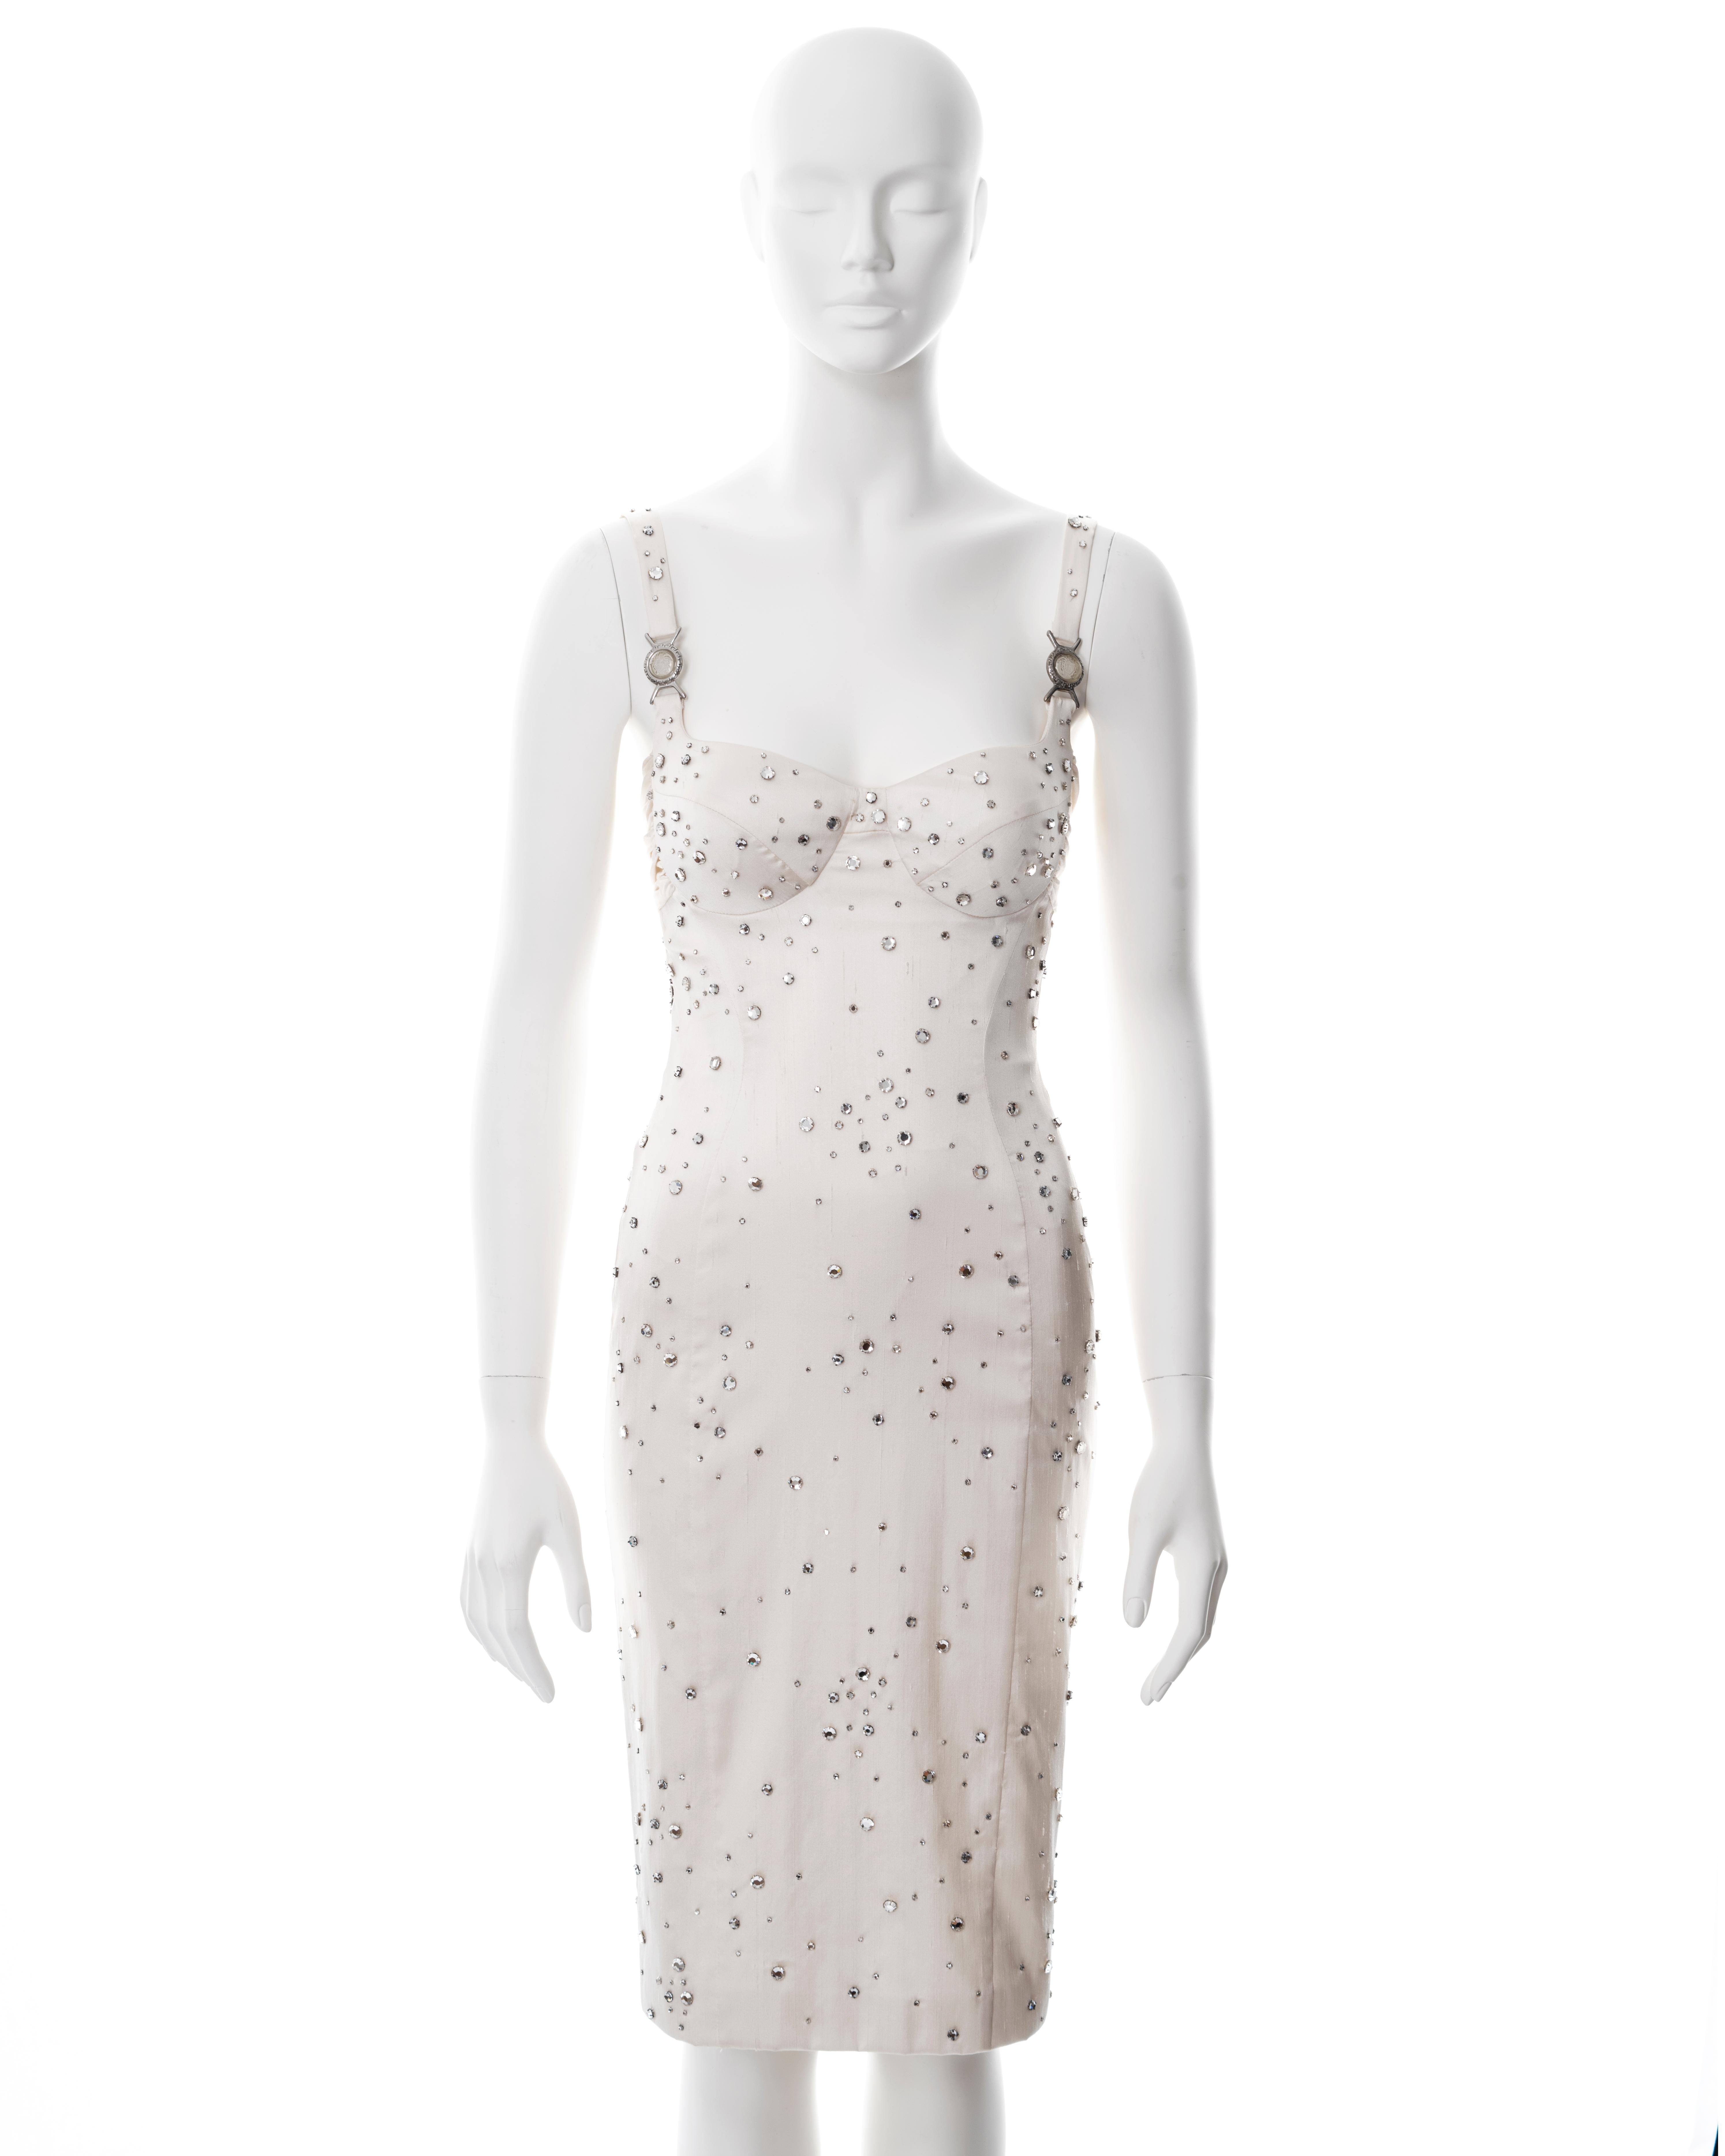 ▪ Versace ivory silk evening dress
▪ Designed by Donatella Versace
▪ Sold by One of a Kind Archive
▪ Spring-Summer 2005
▪ Constructed from a raw silk and spandex blend with a nubby texture 
▪ Embellished with hundreds of hand-sewn crystals set in